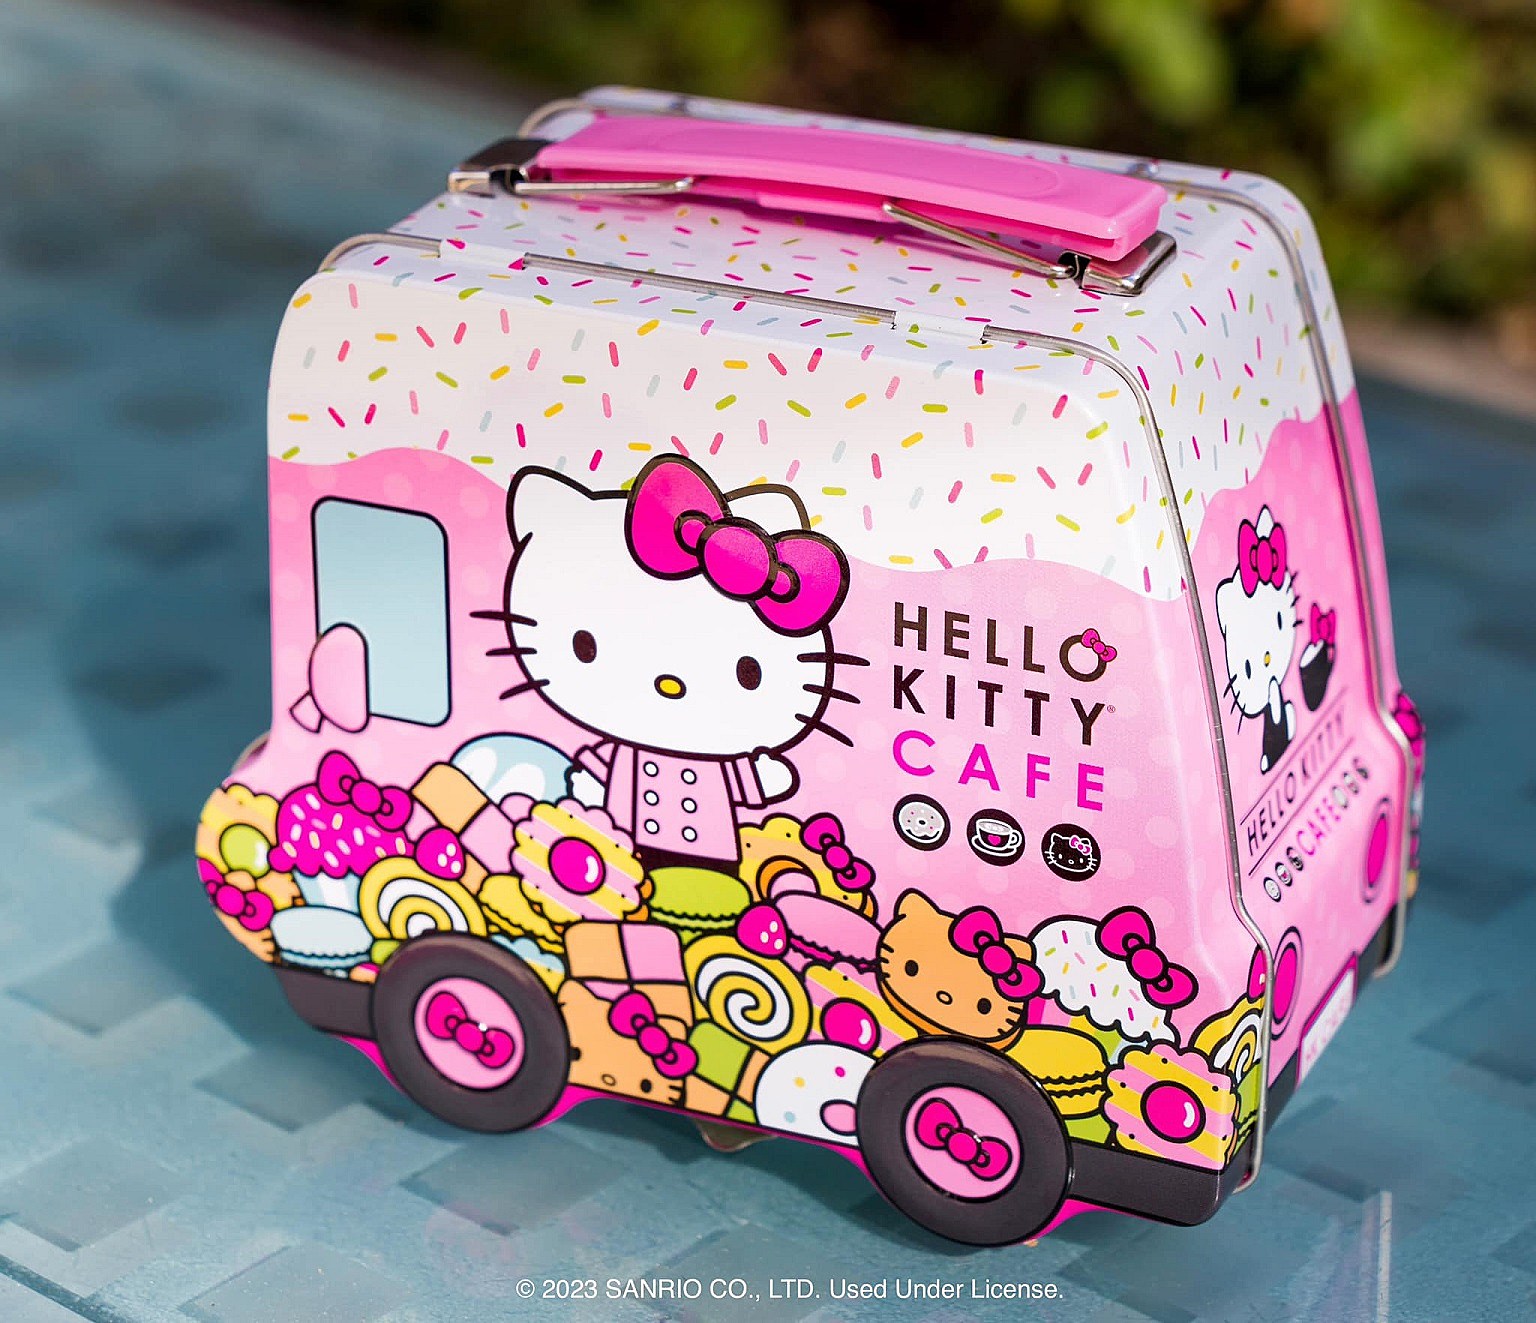 Hello Kitty Cafe Trucks Are On Tour Across The US & Here's What